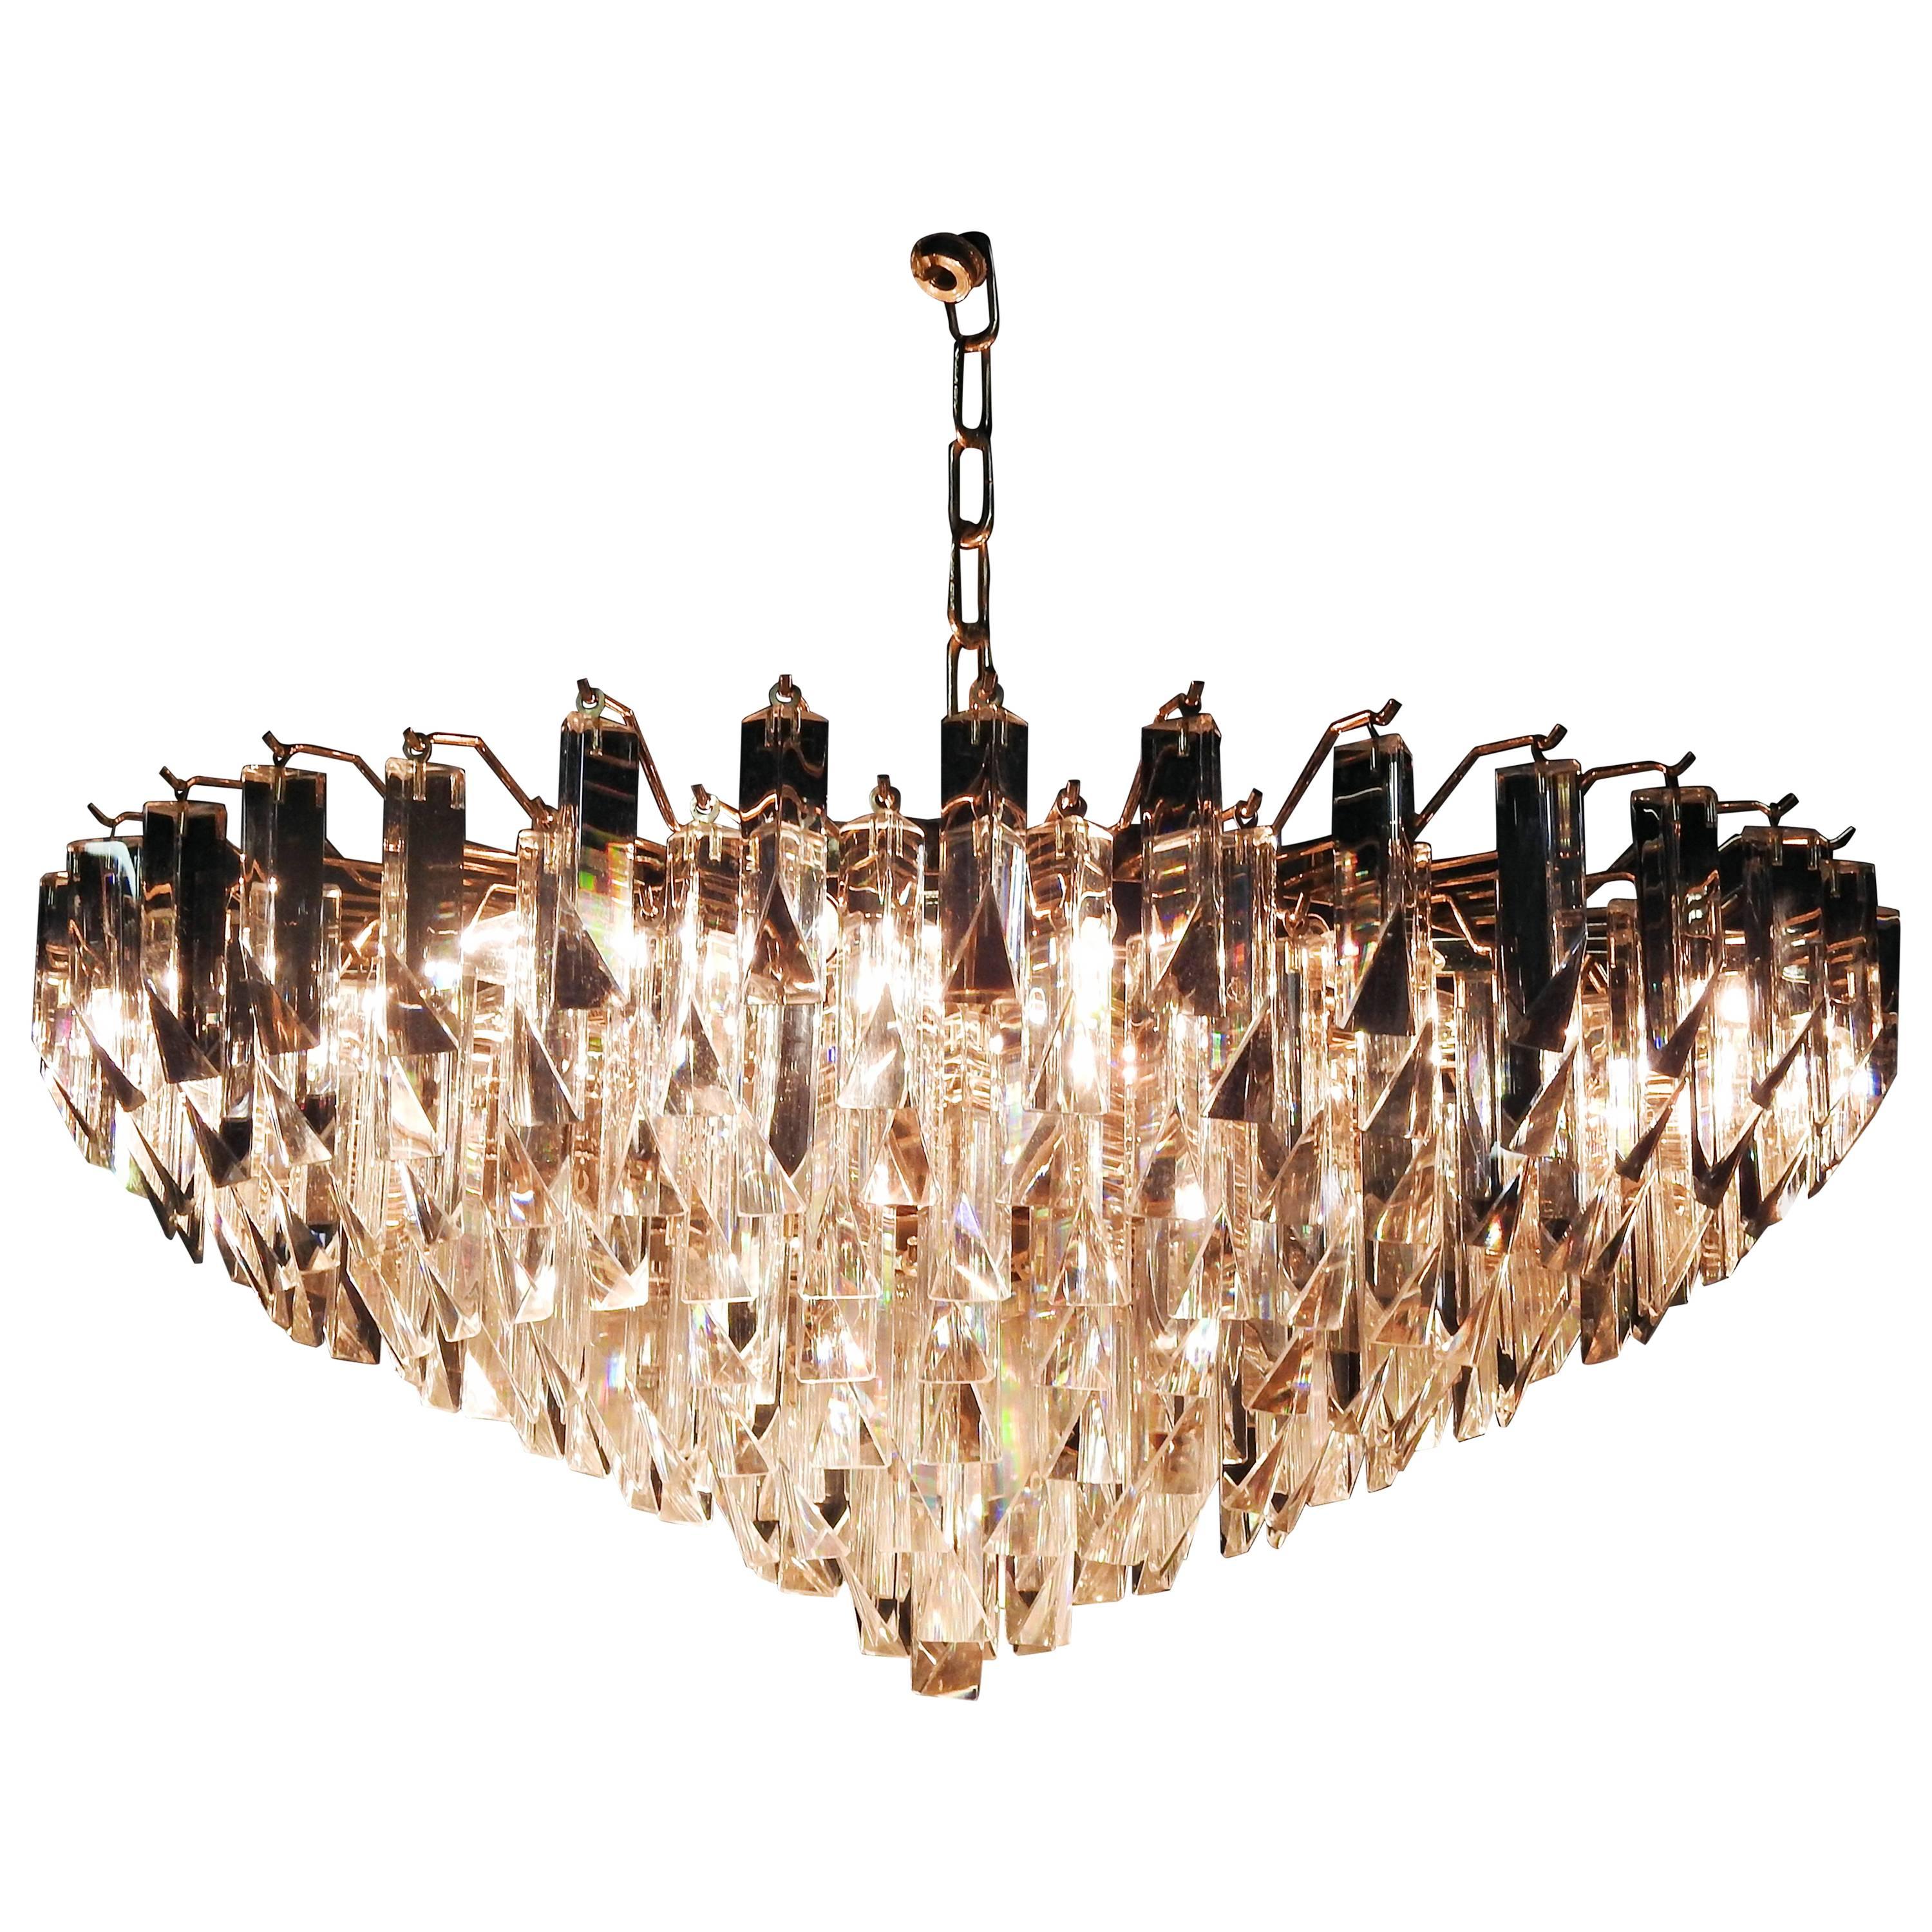 Italian Camer Glass Eight-Tier Chandelier with Venini Tiedri Crystals For Sale